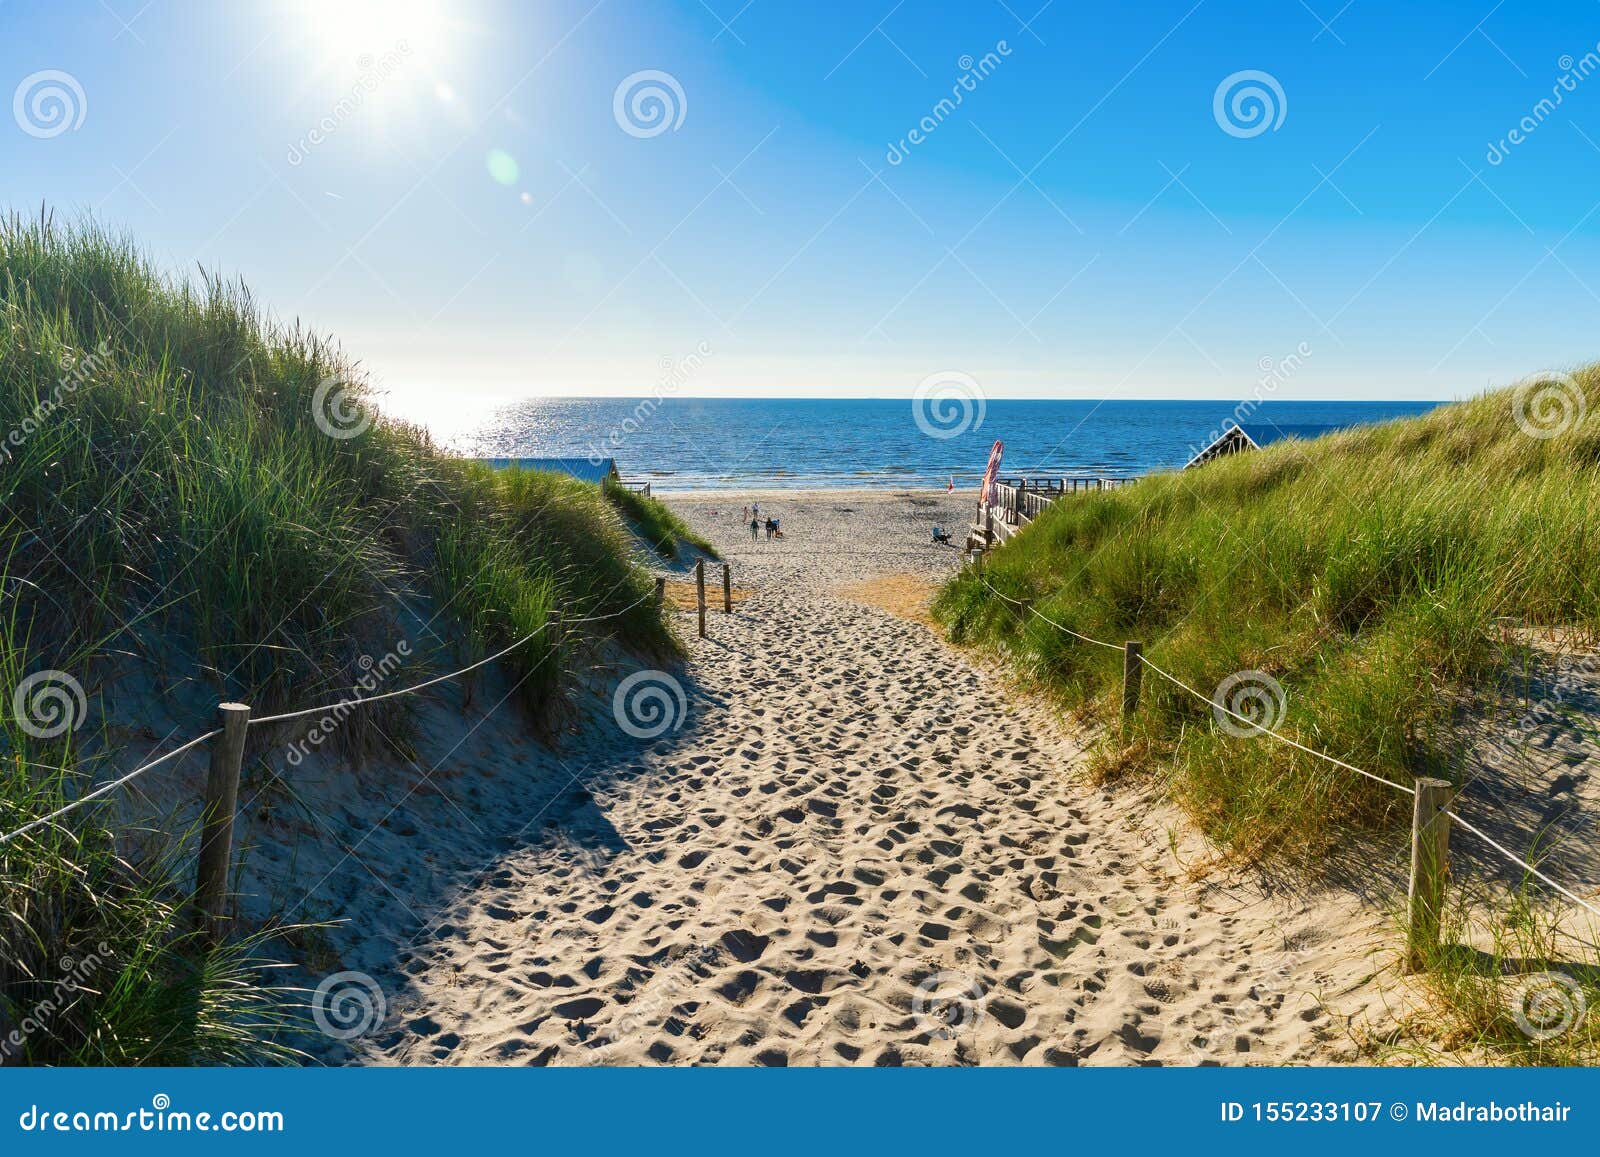 beach access in the dunes of texel, netherlands